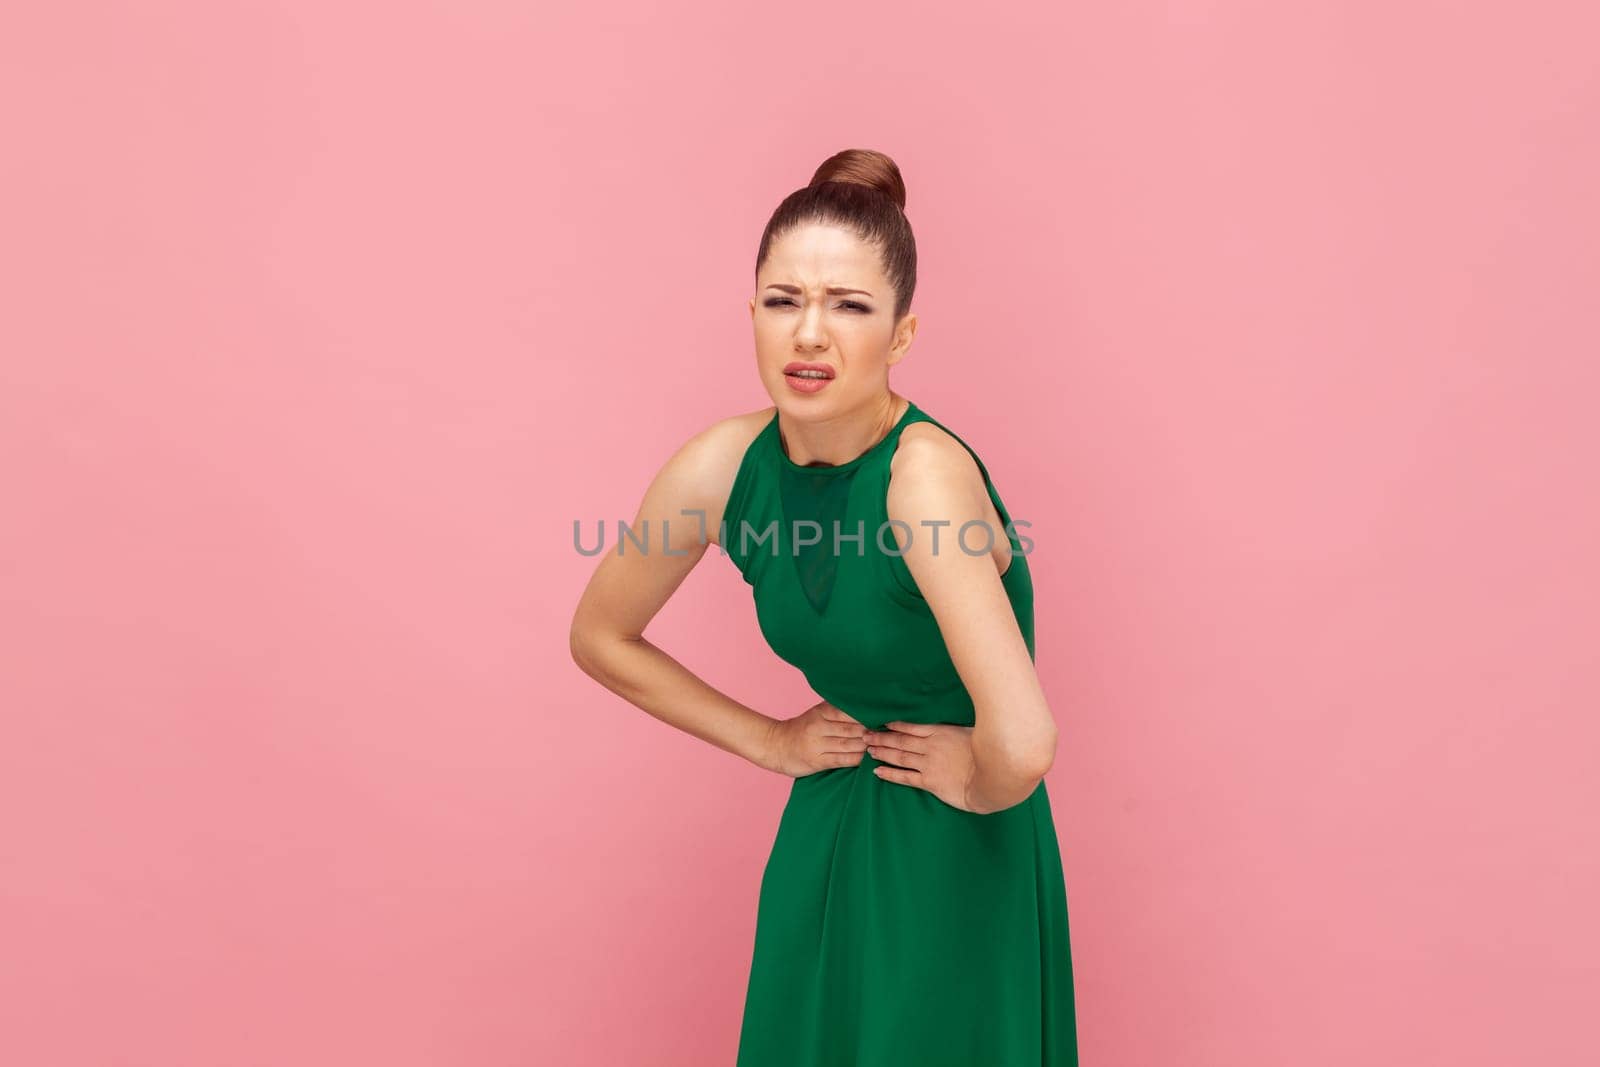 Portrait of dissatisfied unhealthy sick woman keeping hands on stomach, suffers from pain, has menstruation, wearing green dress. Indoor studio shot isolated on pink background.